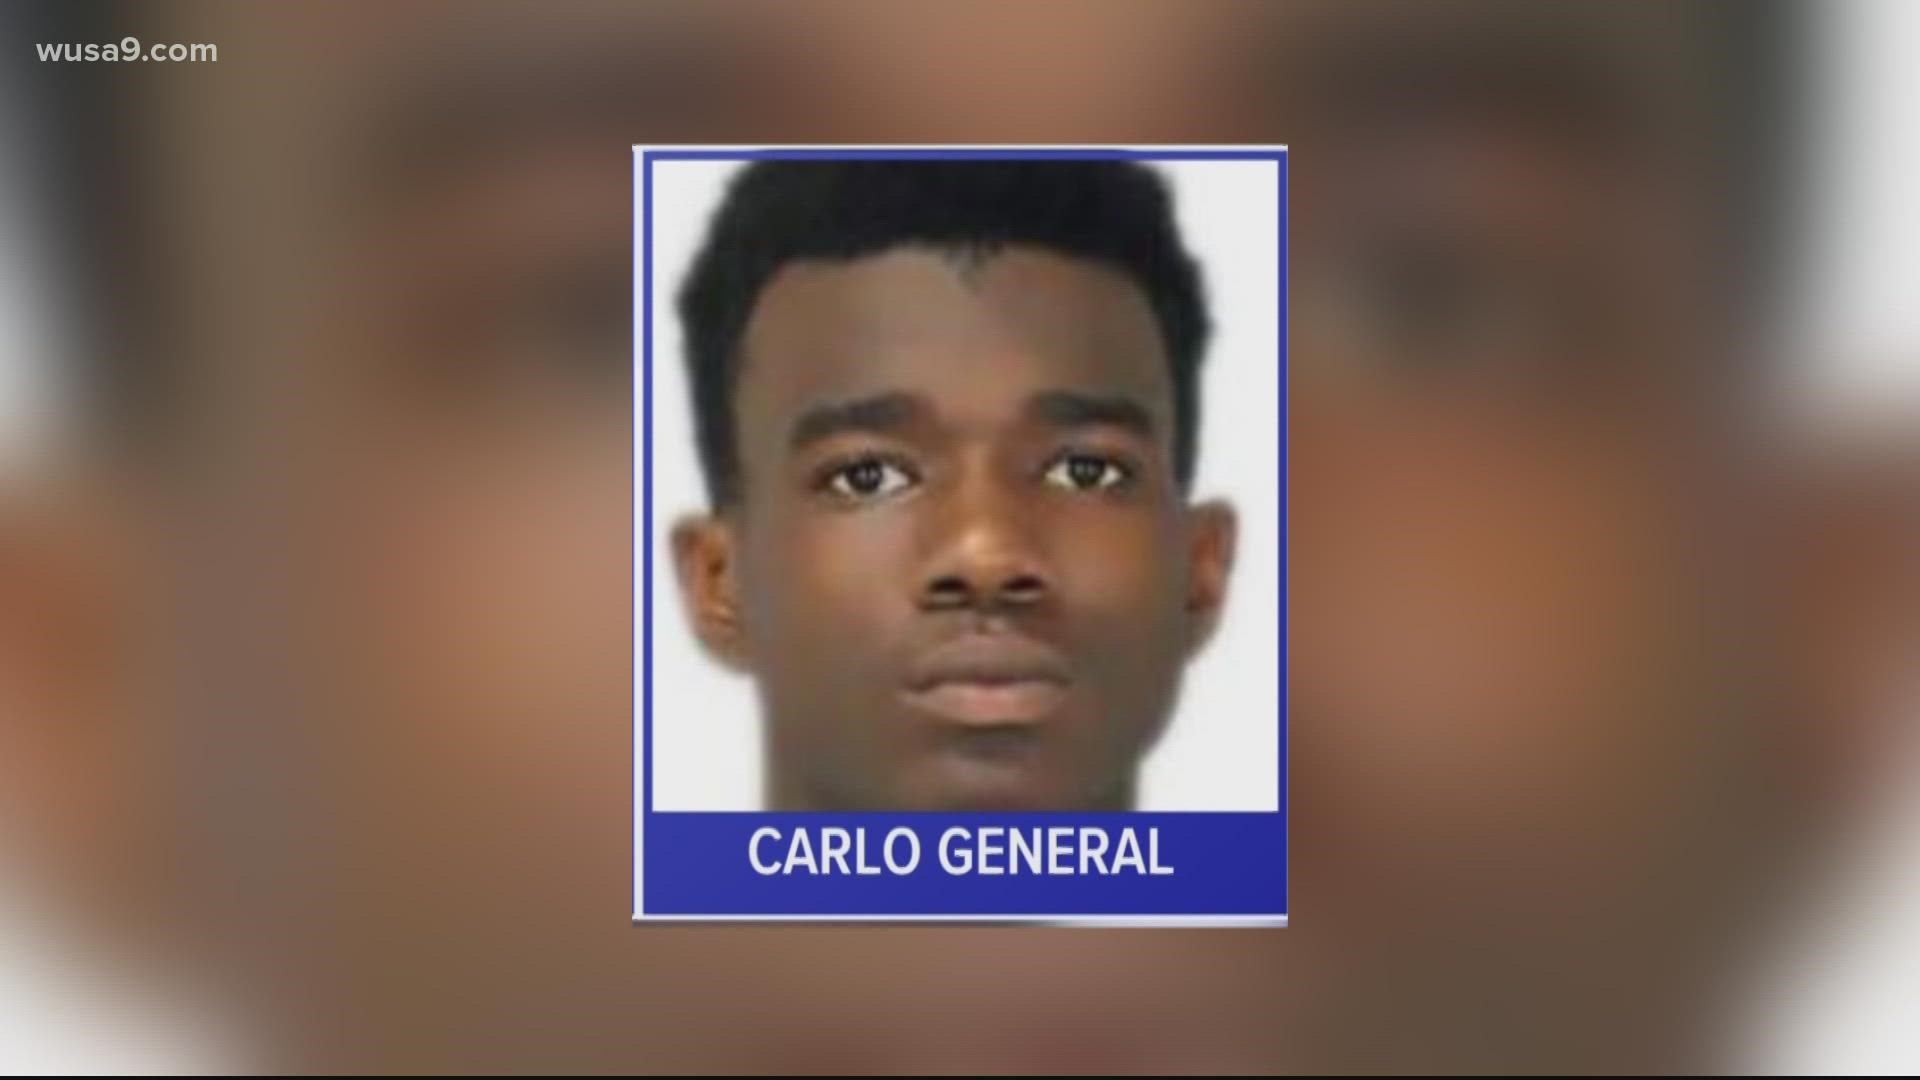 Davon McNeal was hit by gunfire in July 2020 while he was running toward a basement apartment. Carlo General is now the fourth person to plead guilty in this case